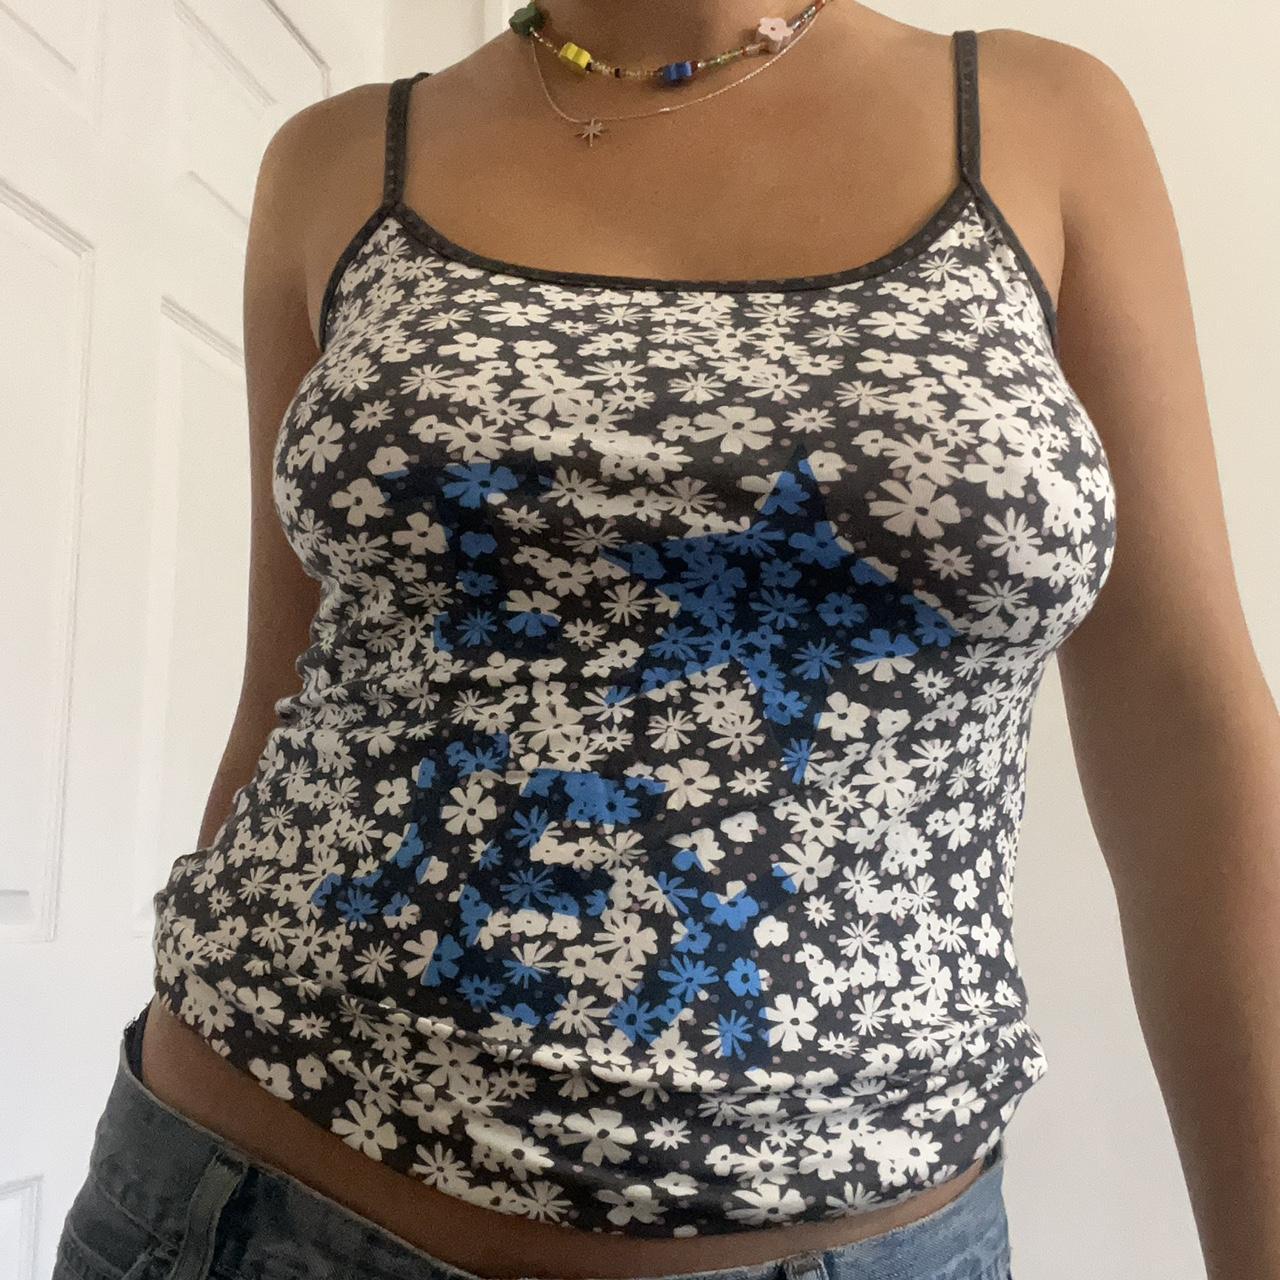 The I ⭐️ Sex Tank Top Screen Printed Tank Top With Depop 2118